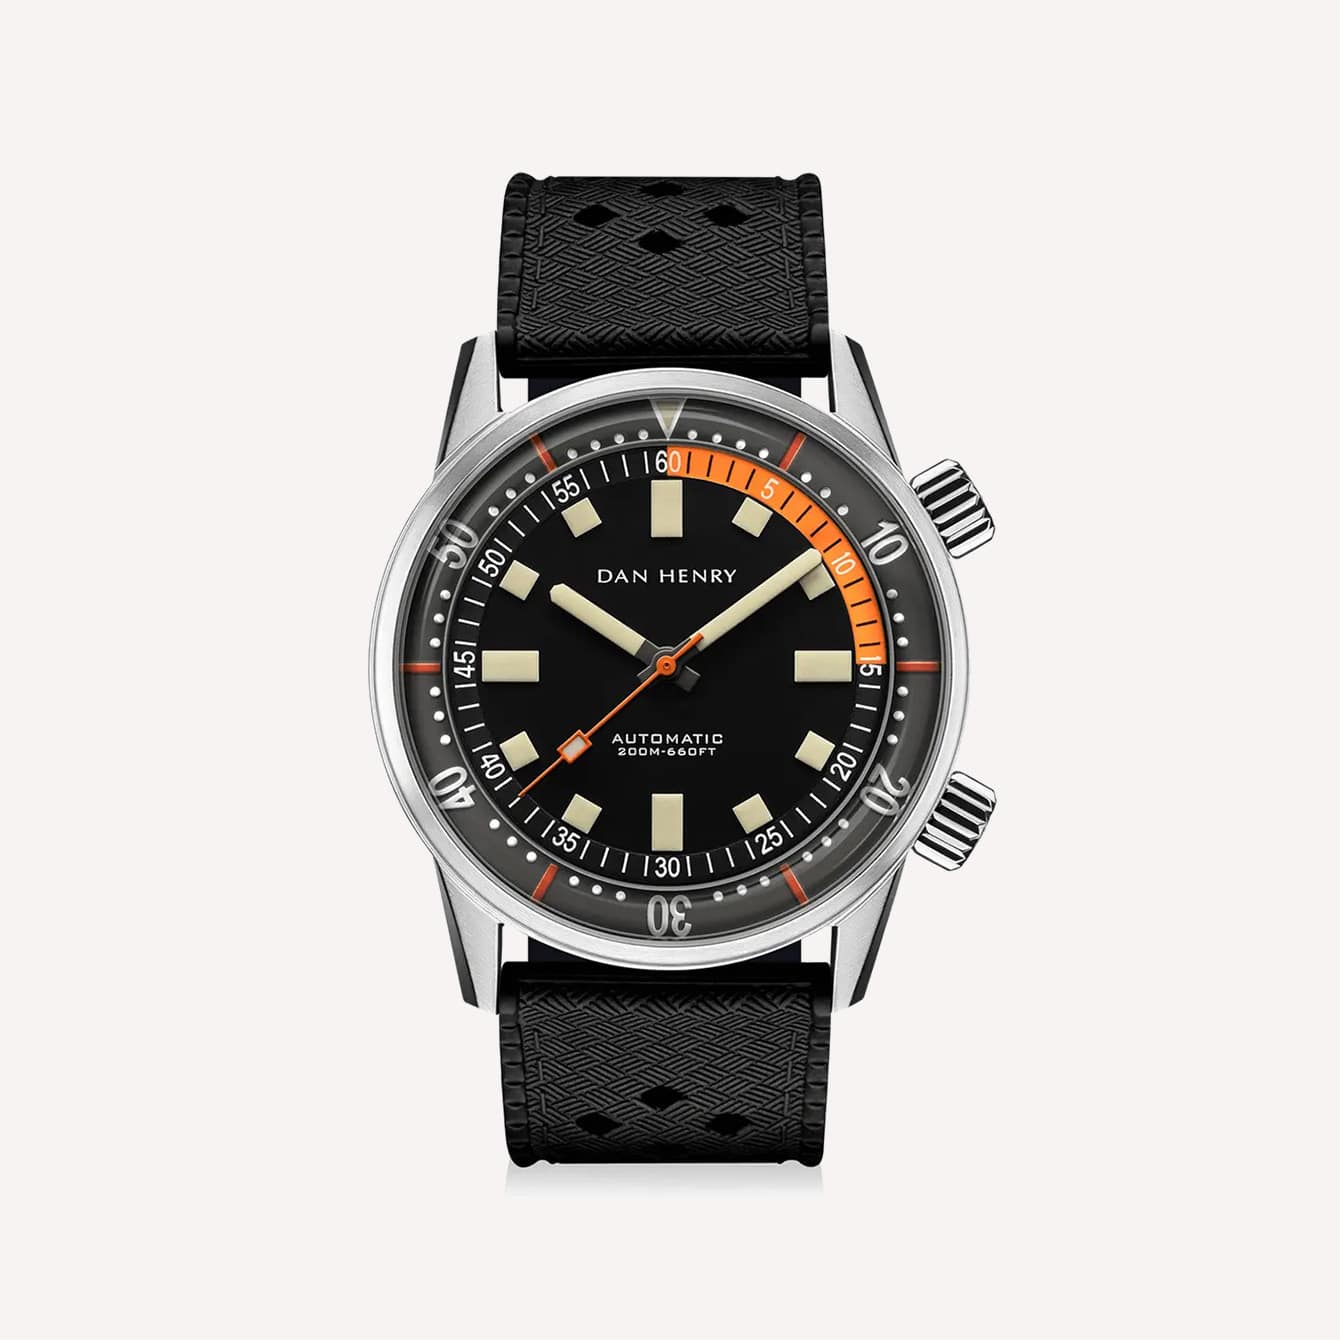 Dan Henry 1970 Automatic Diver: Designed by a total watch nerd, this is definitely worth checking out if you’re into microbrands.